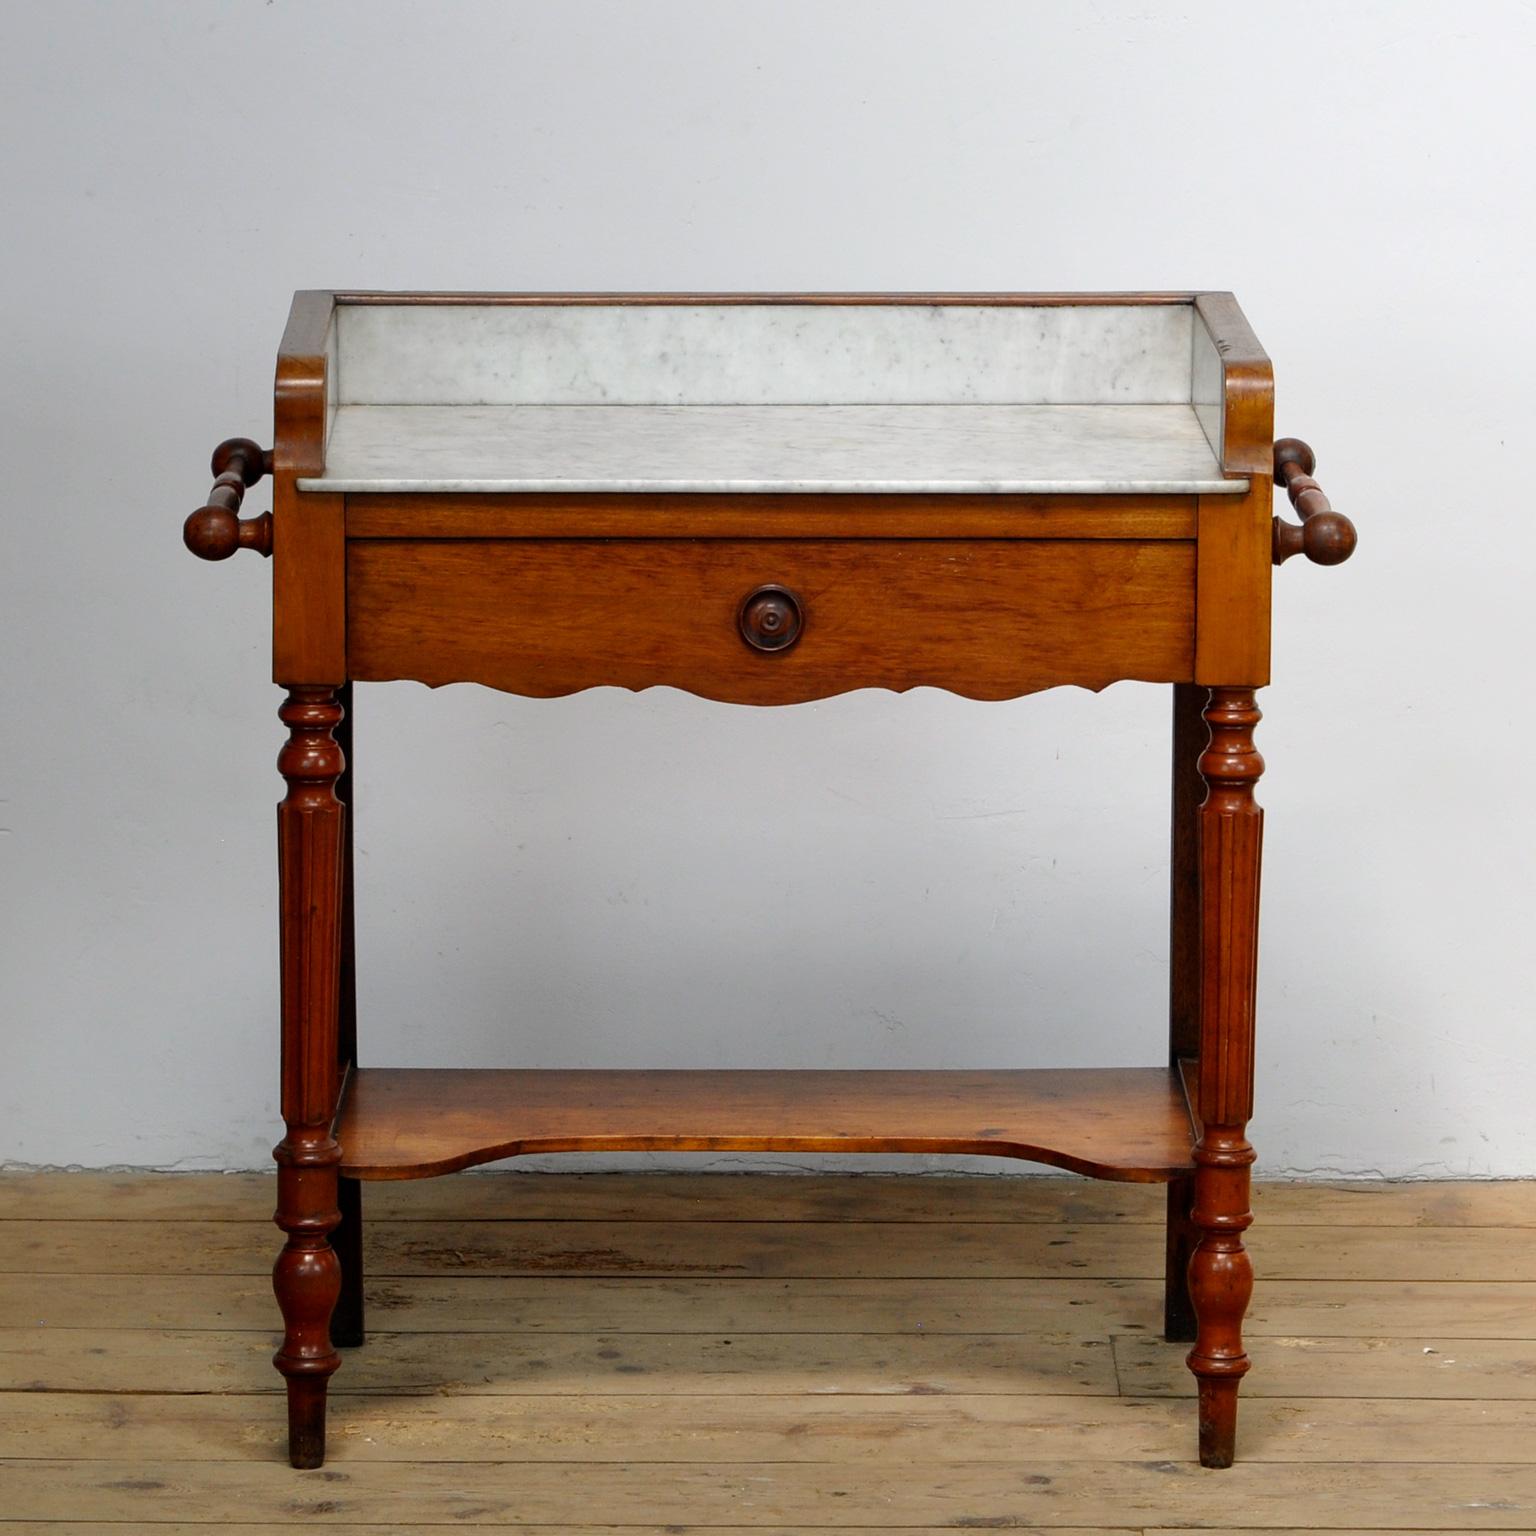  Antique french oak dressing table with marble top with a drawer underneath. A rod on the sides to hang a towel. The cabinet was made around 1920. 